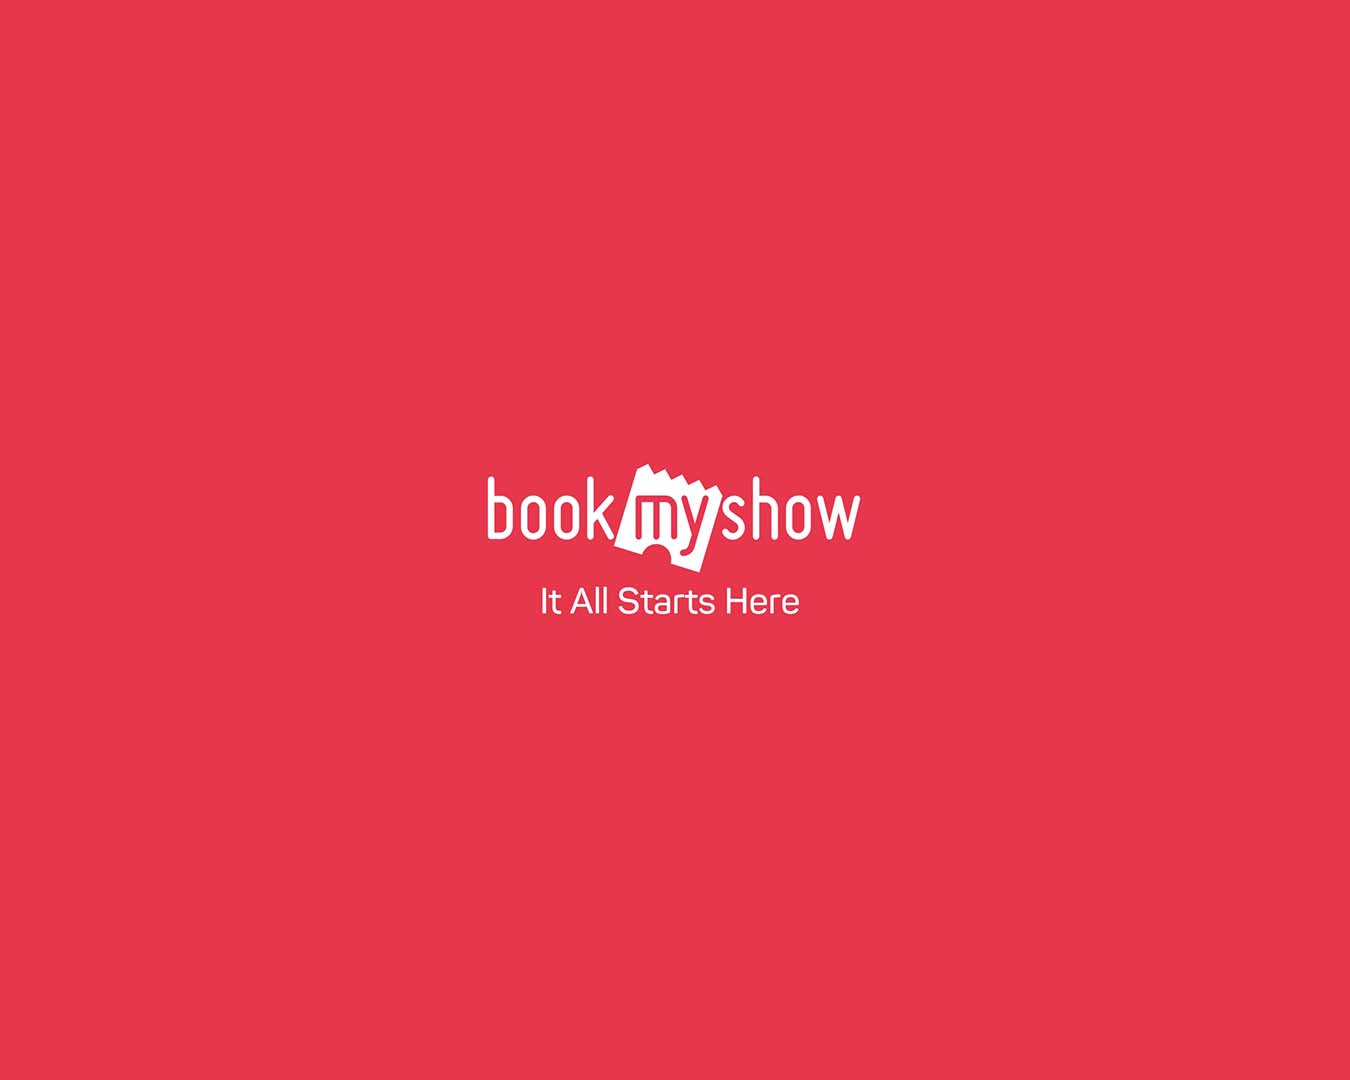 GitHub - moitri-hazra/BookMyShow-frontend: Our team developed Book My Show,  a web app for movie ticket bookings. Built with React and styled using CSS,  users can select movies, choose showtime slots and seats.